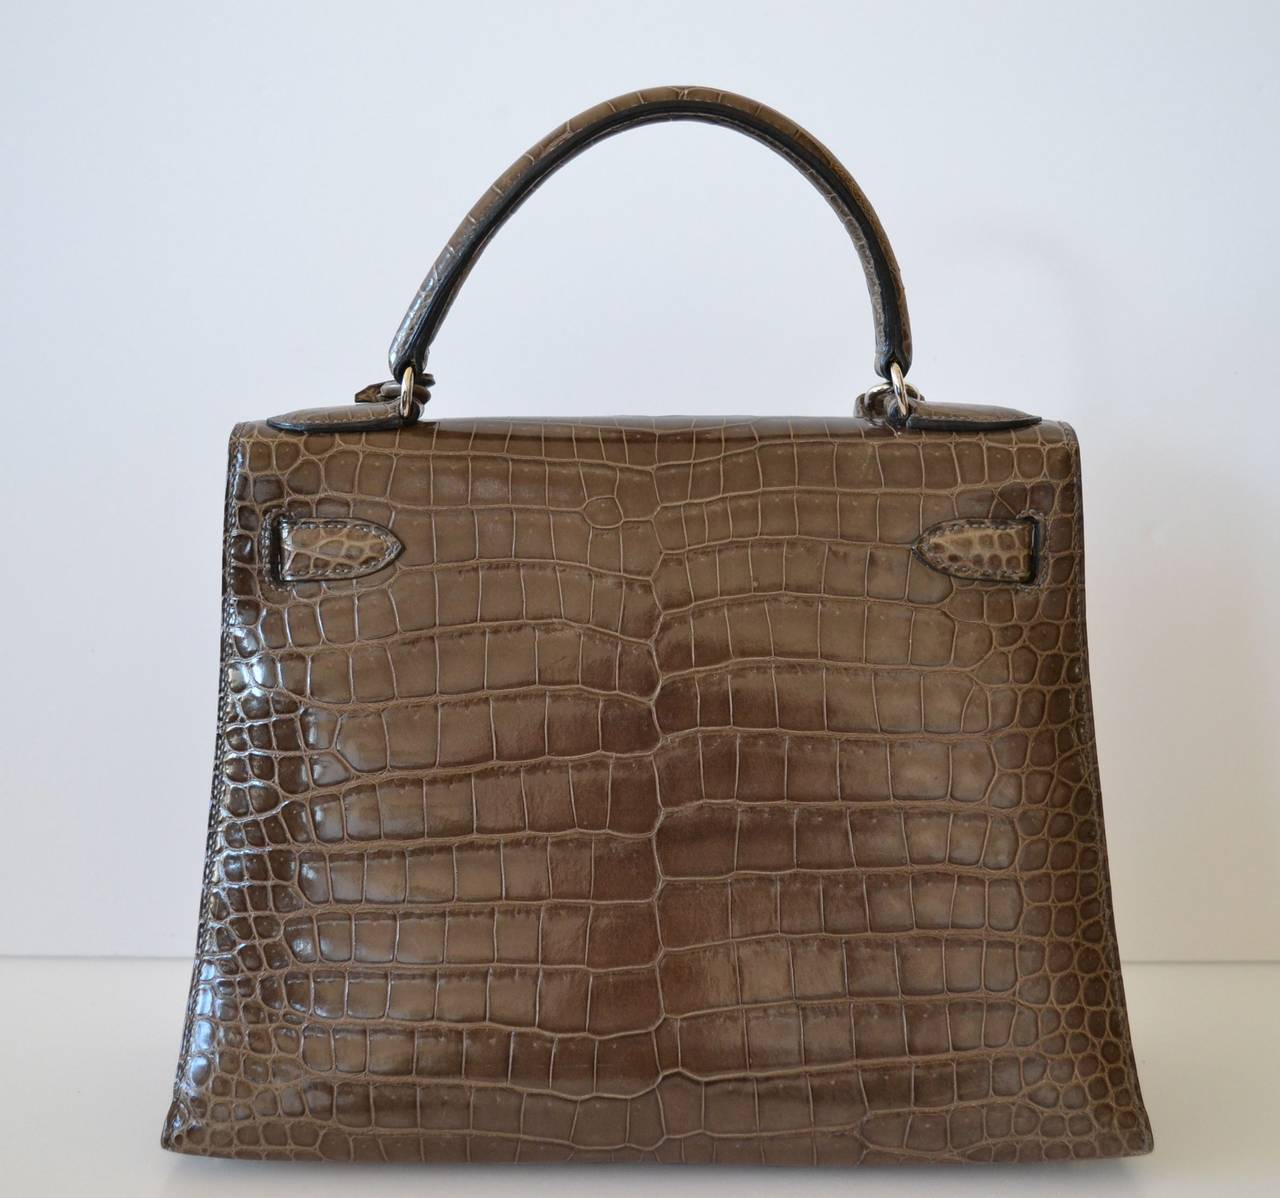 Hermes Kelly 28 Vert de gris Porosus crocodile
Rare size
Crocodile Porosus
 
Vert de gris color is a particular color which can have two tones.
Vert de gris is between « Gris elephant » and Olive
Lining is in grey-green color 
 
Palladium